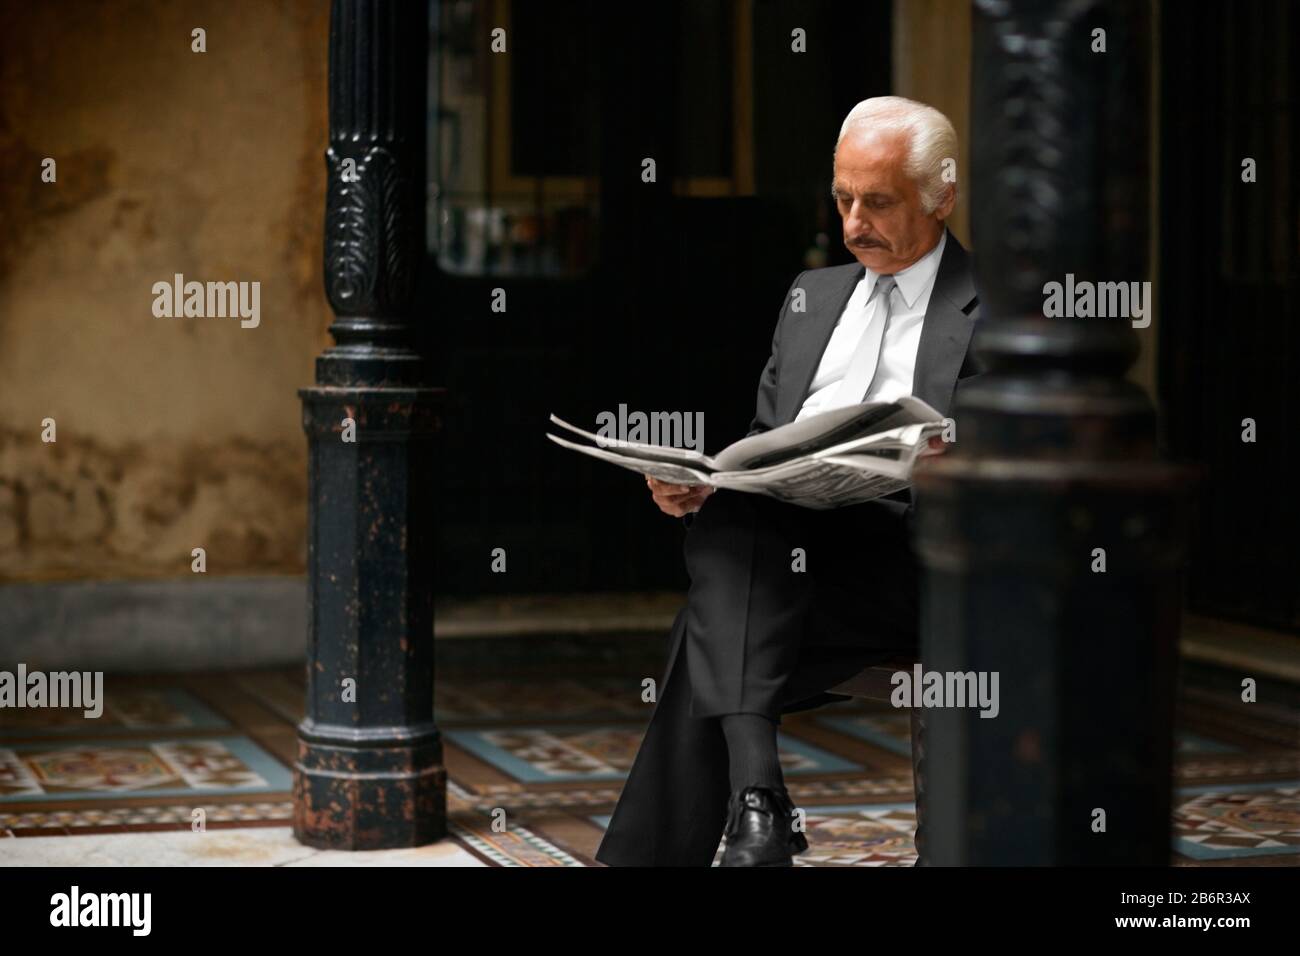 Side view of a man reading a newspaper. Stock Photo